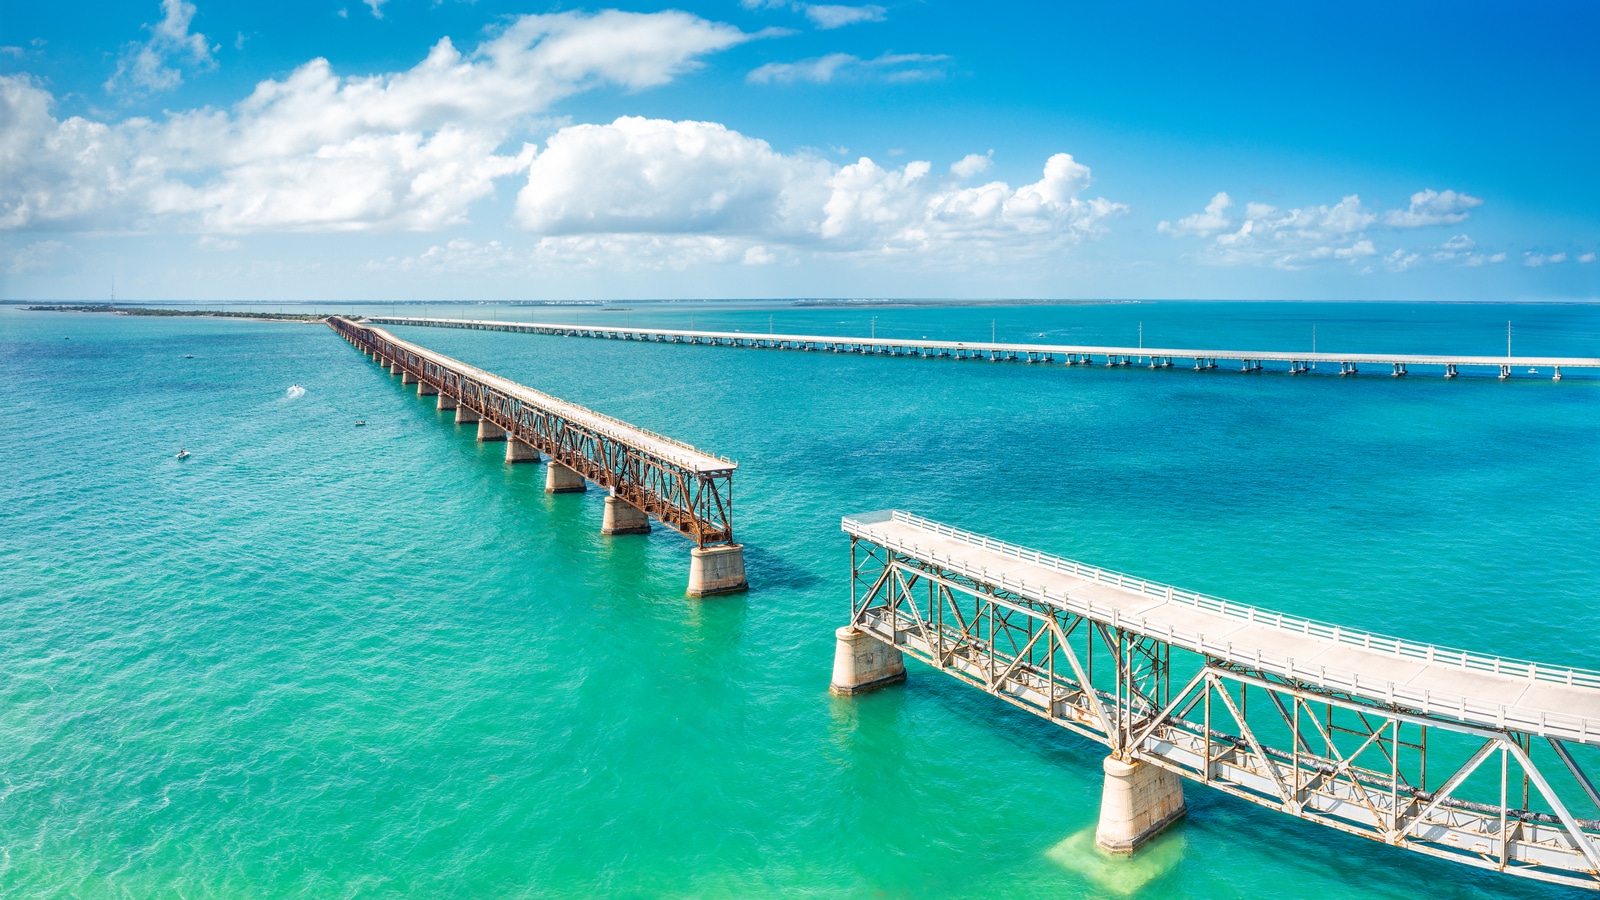 Key West and the Florida Keys Travel Guide